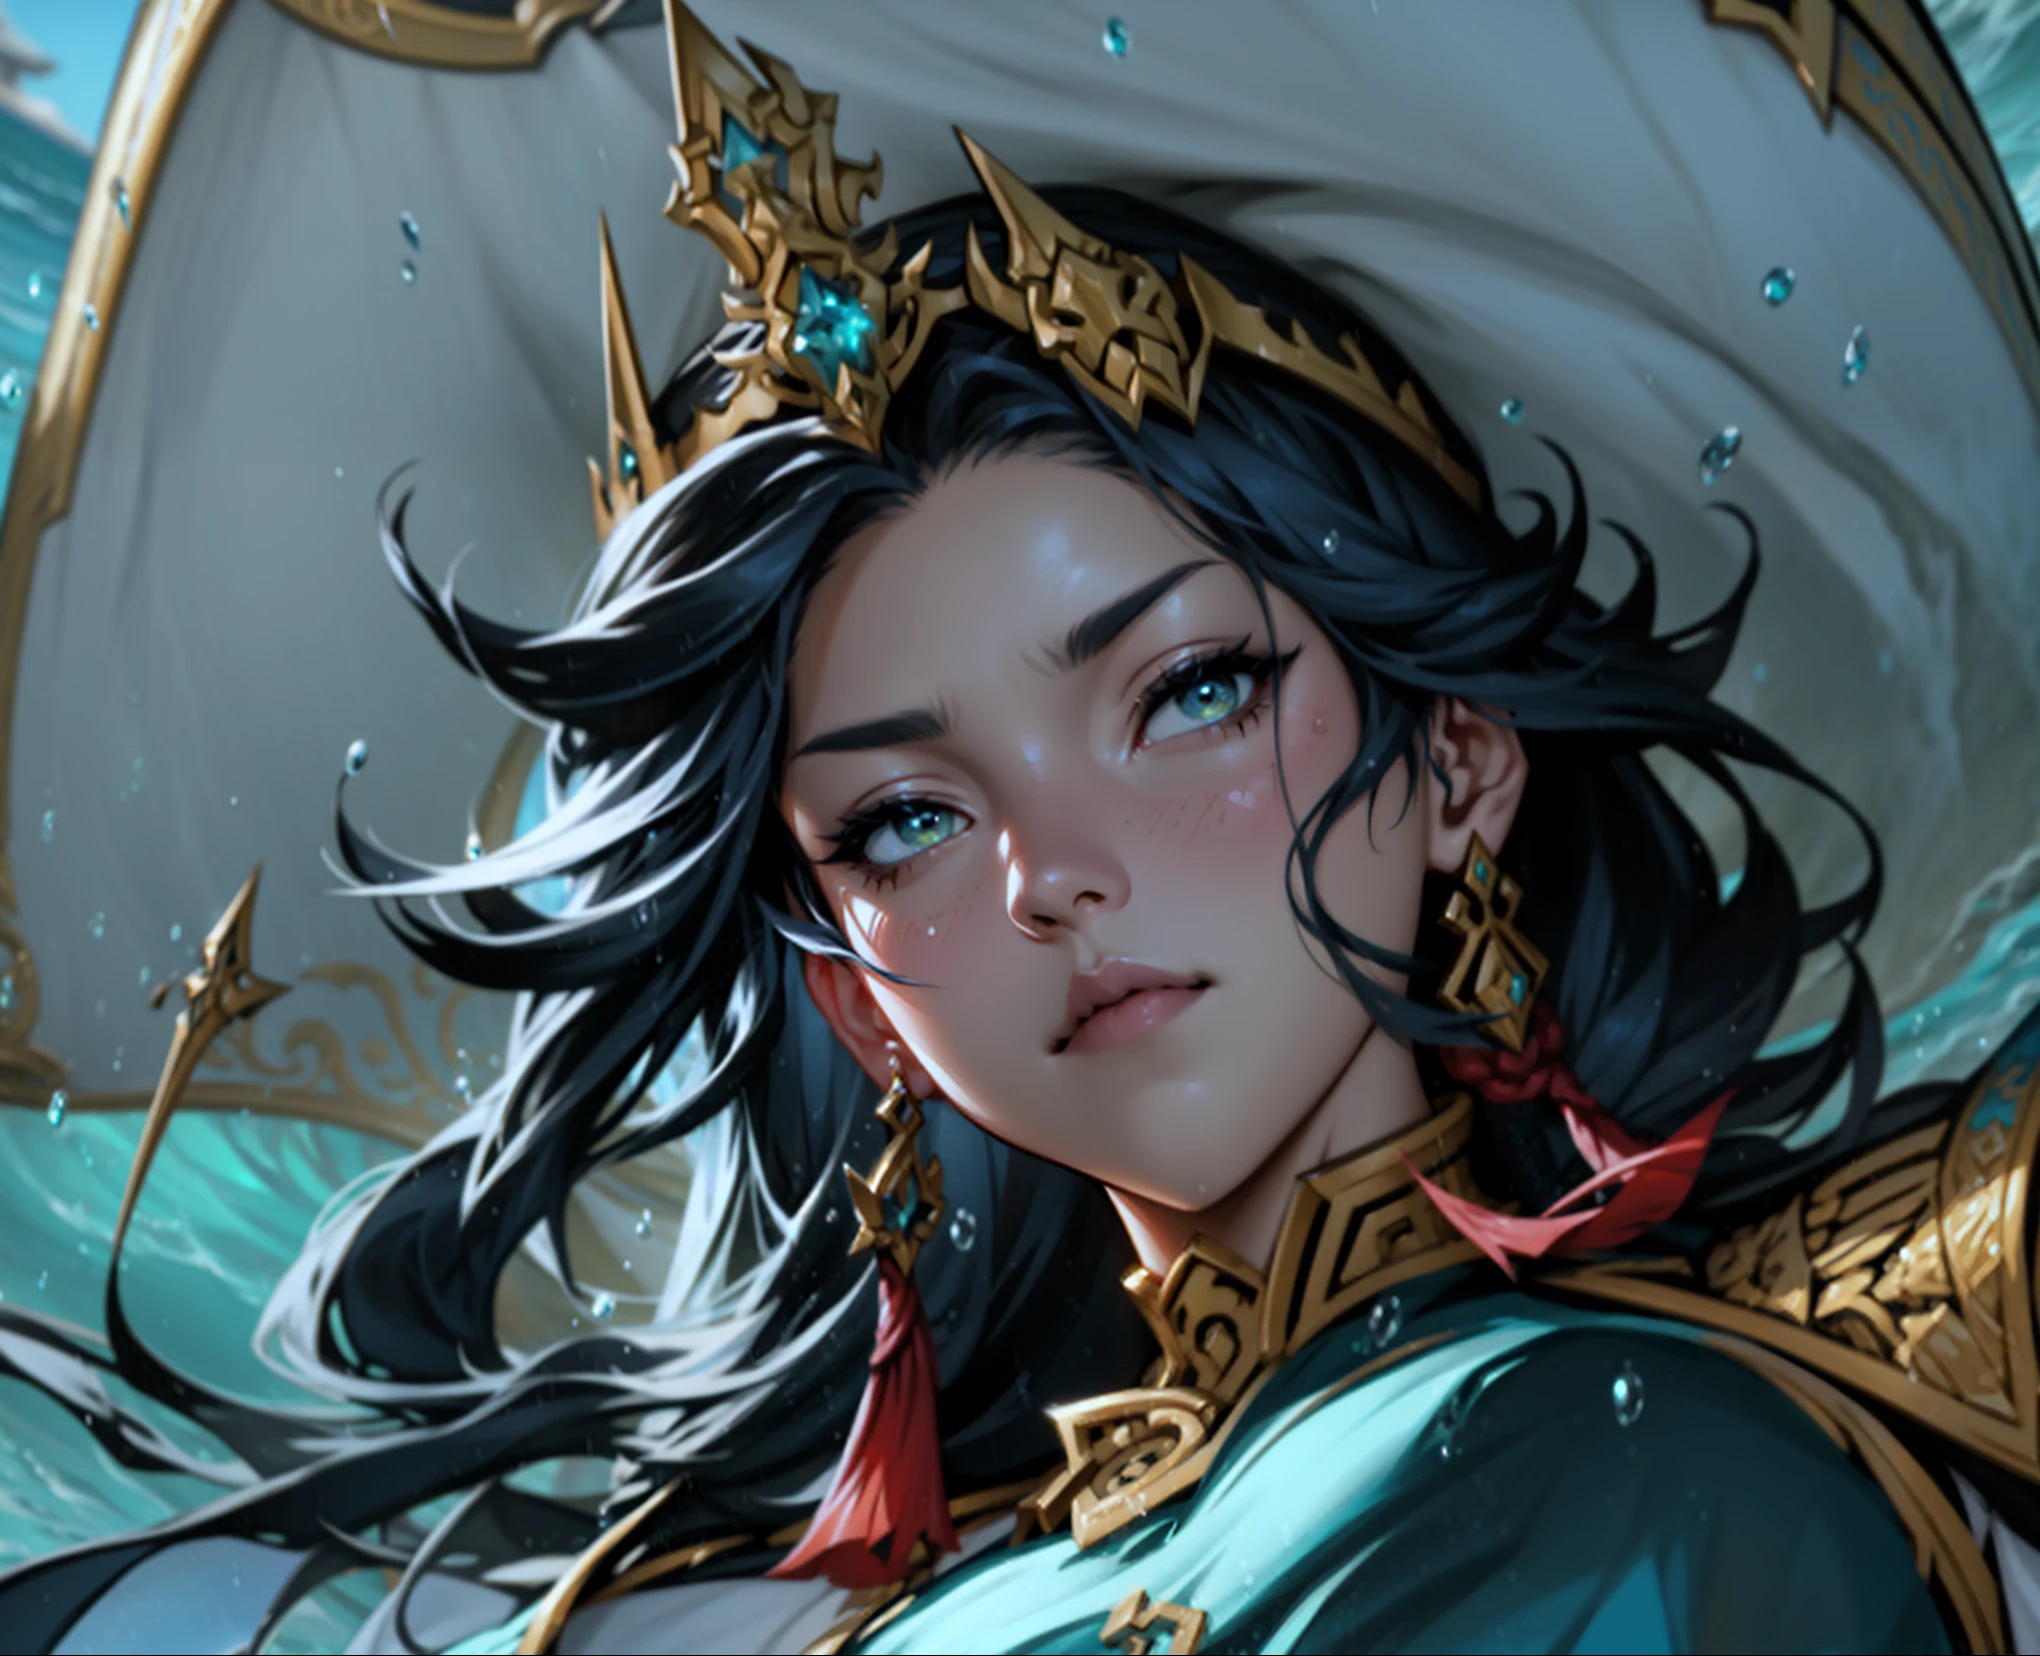 A group of anime characters holding swords, Queen of the Sea Mu Yanling, One Piece, character splash art, League of Legends style, League of Legends art style, wild rift, Legends of Runeterra, mobile legends, g liulian art style, Official splash art,In the sea，huge waves，Behind the boat，Heavy rain day，On the sea，clear structure，Exquisite facial features，captain，Caribbean